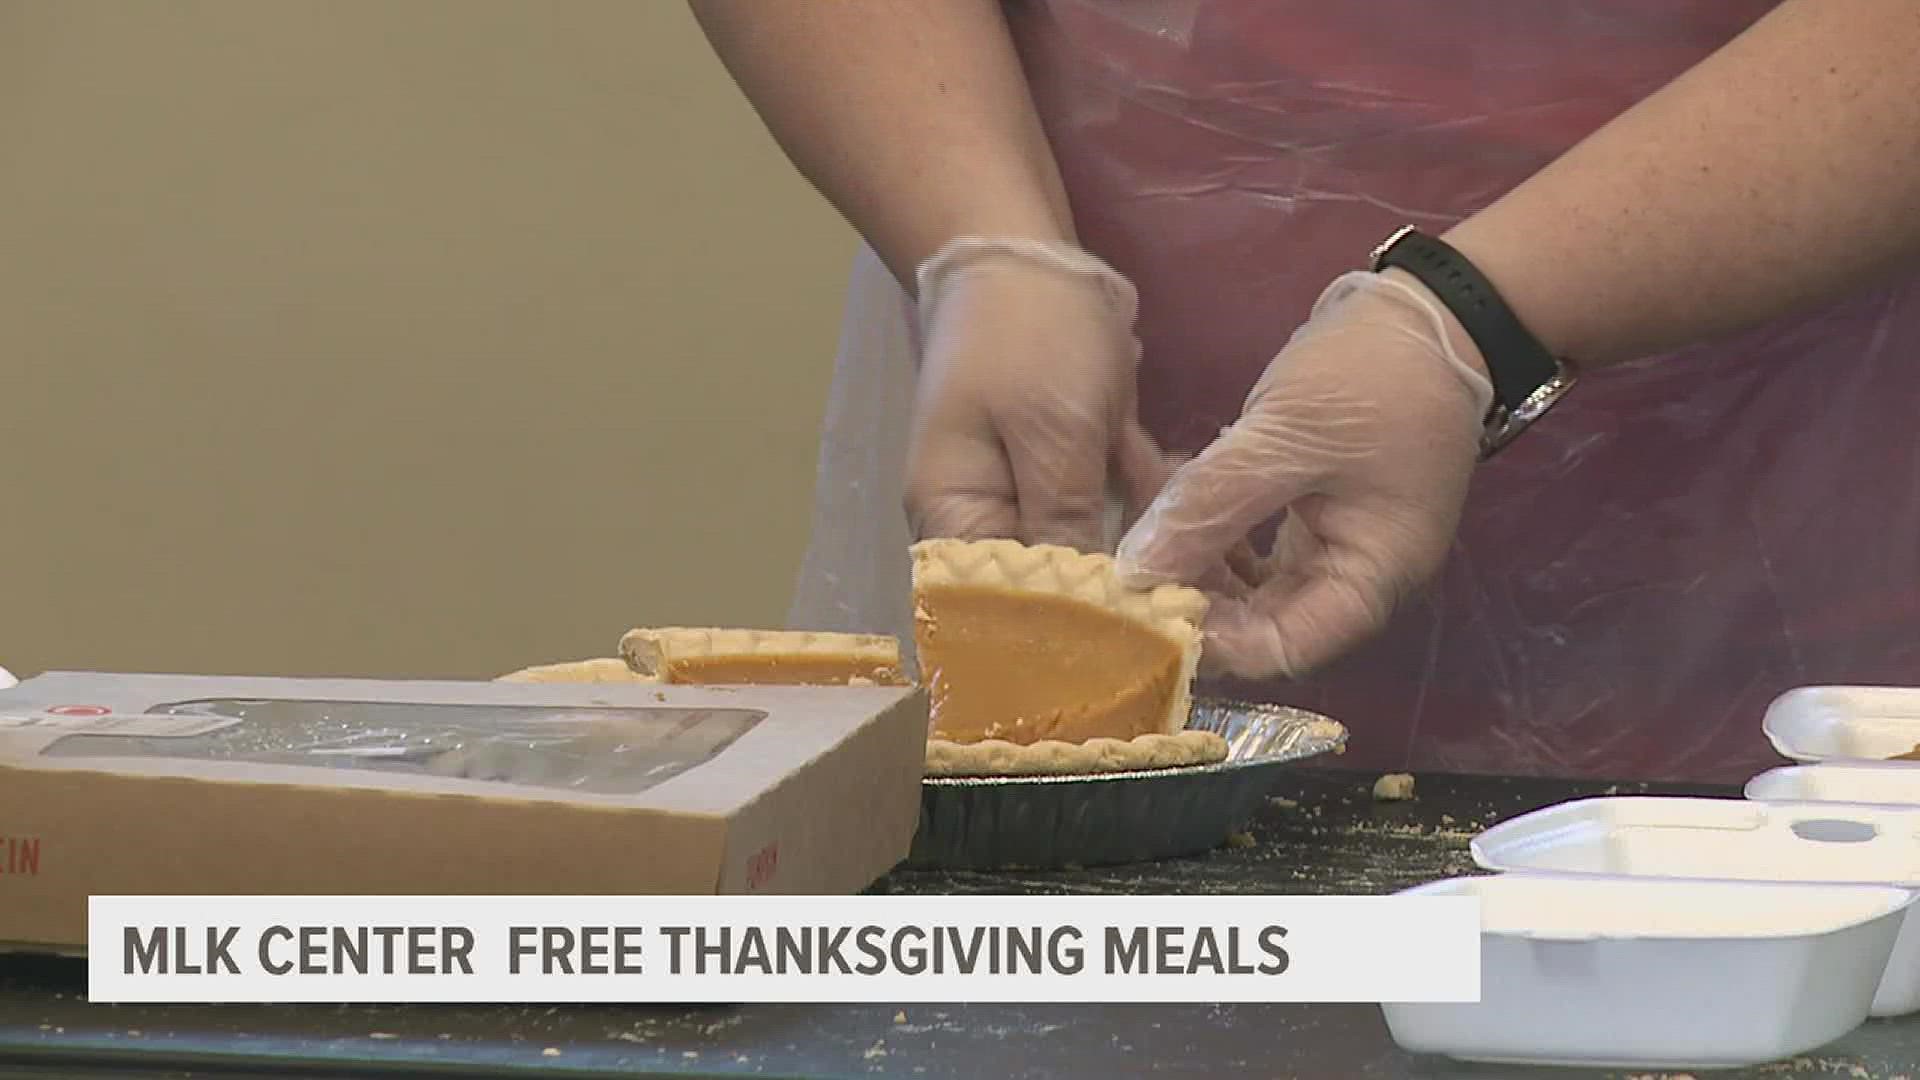 The center handed out more than 3,000 meals on Saturday.